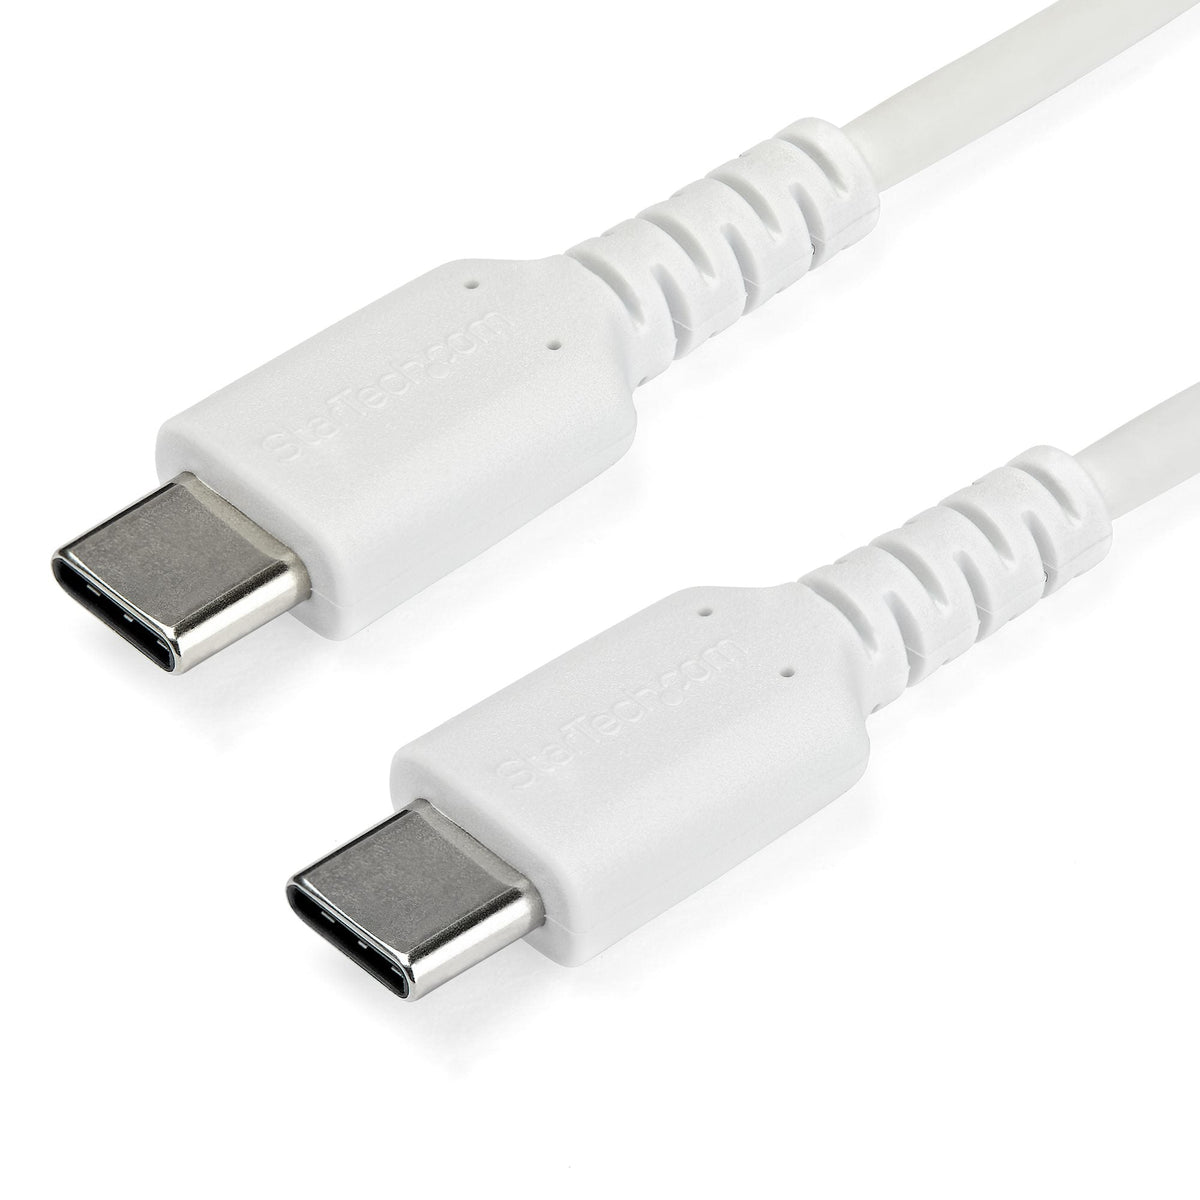 StarTech.com 1m USB C Charging Cable - Durable Fast Charge & Sync USB 2.0 Type C to USB C Laptop Charger Cord - TPE Jacket Aramid Fiber M/M 60W White - Samsung S10 S20 iPad Pro MS Surface